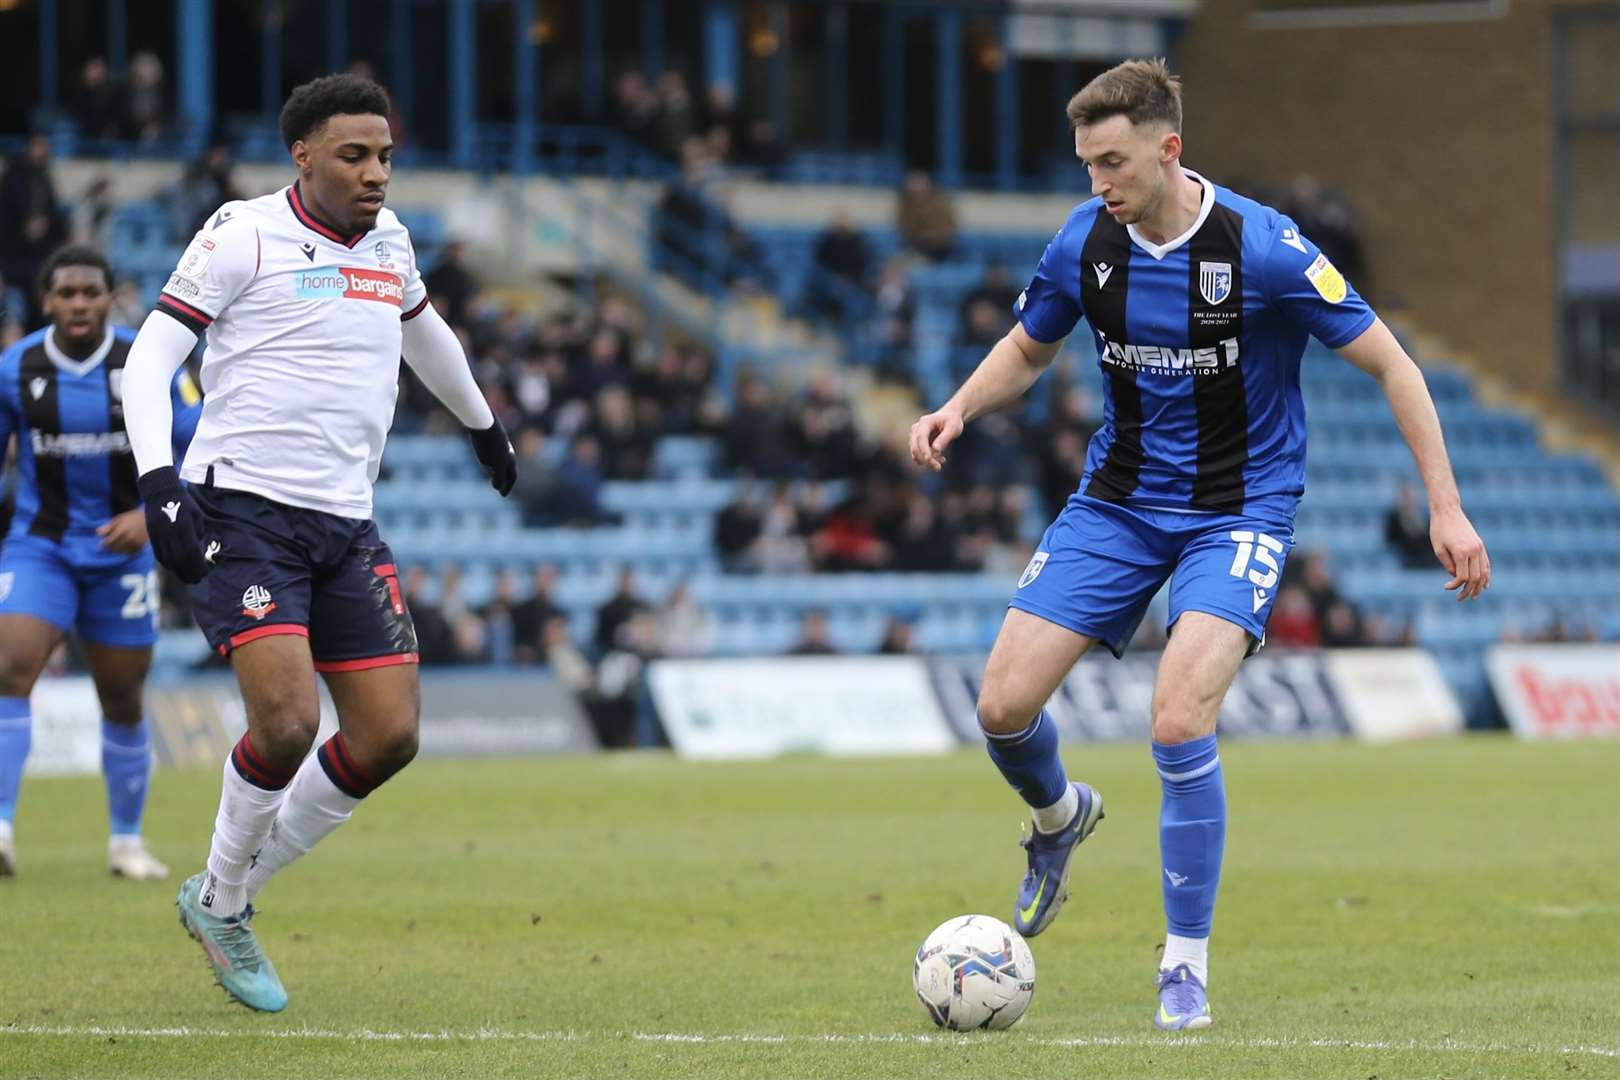 QPR defender Conor Masterson enjoyed a loan spell with the Gills last season